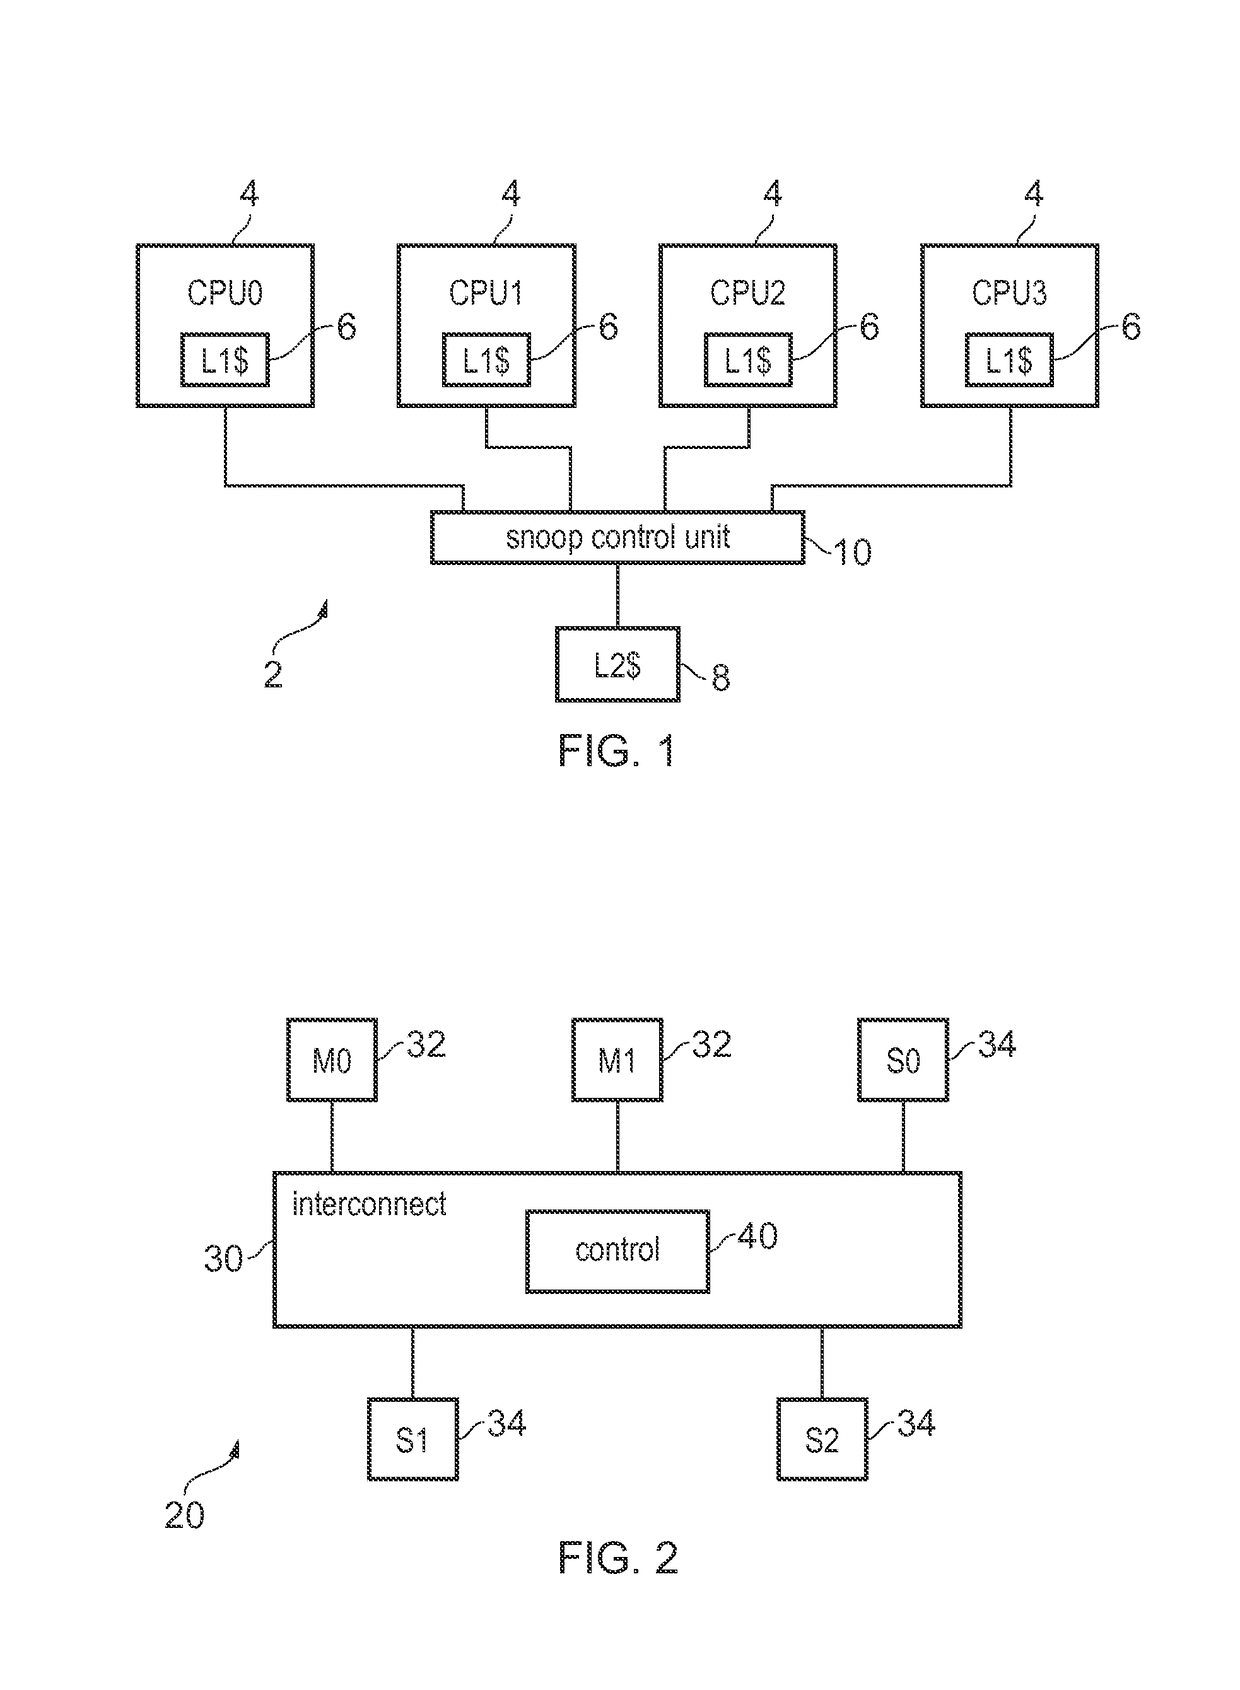 Arbitration and hazard detection for a data processing apparatus